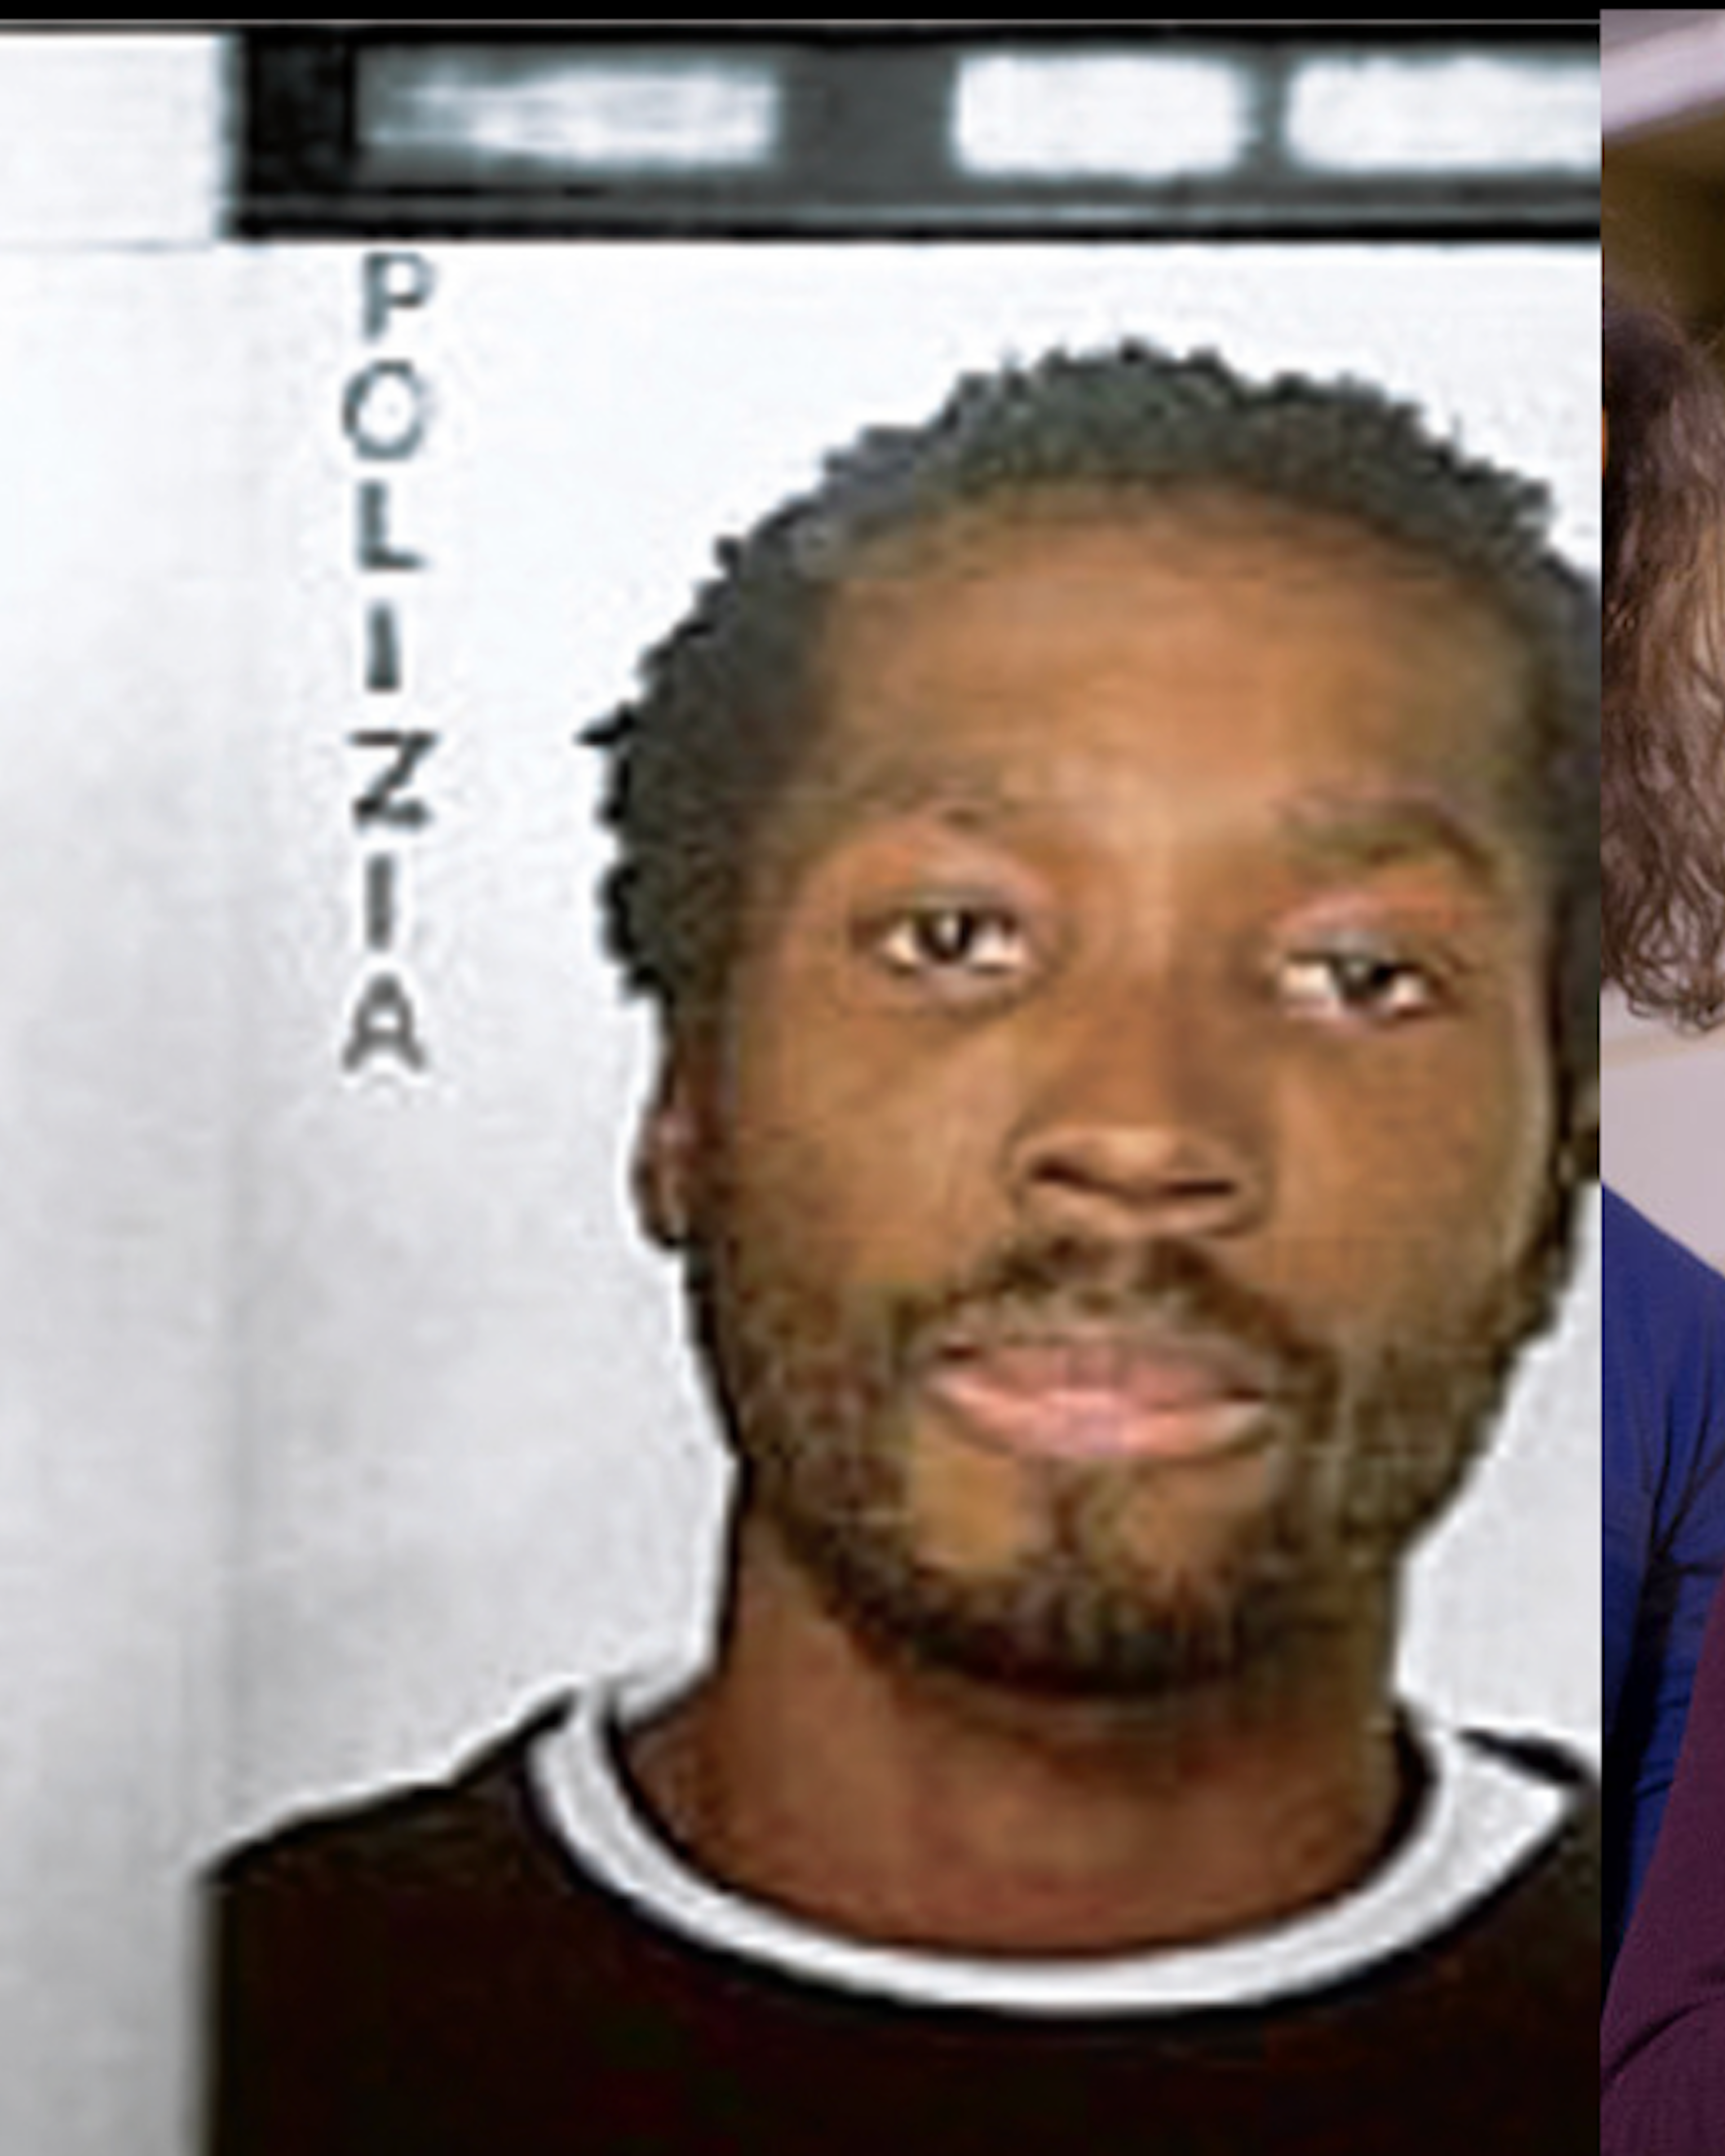 Evidence was always clear that migrant Rudy Guede, left, murdered Meredith Kercher. But prosecutors and the media falsely blamed Amanda Knox, right. (Italian police/Stephen Brashear/Getty Images)